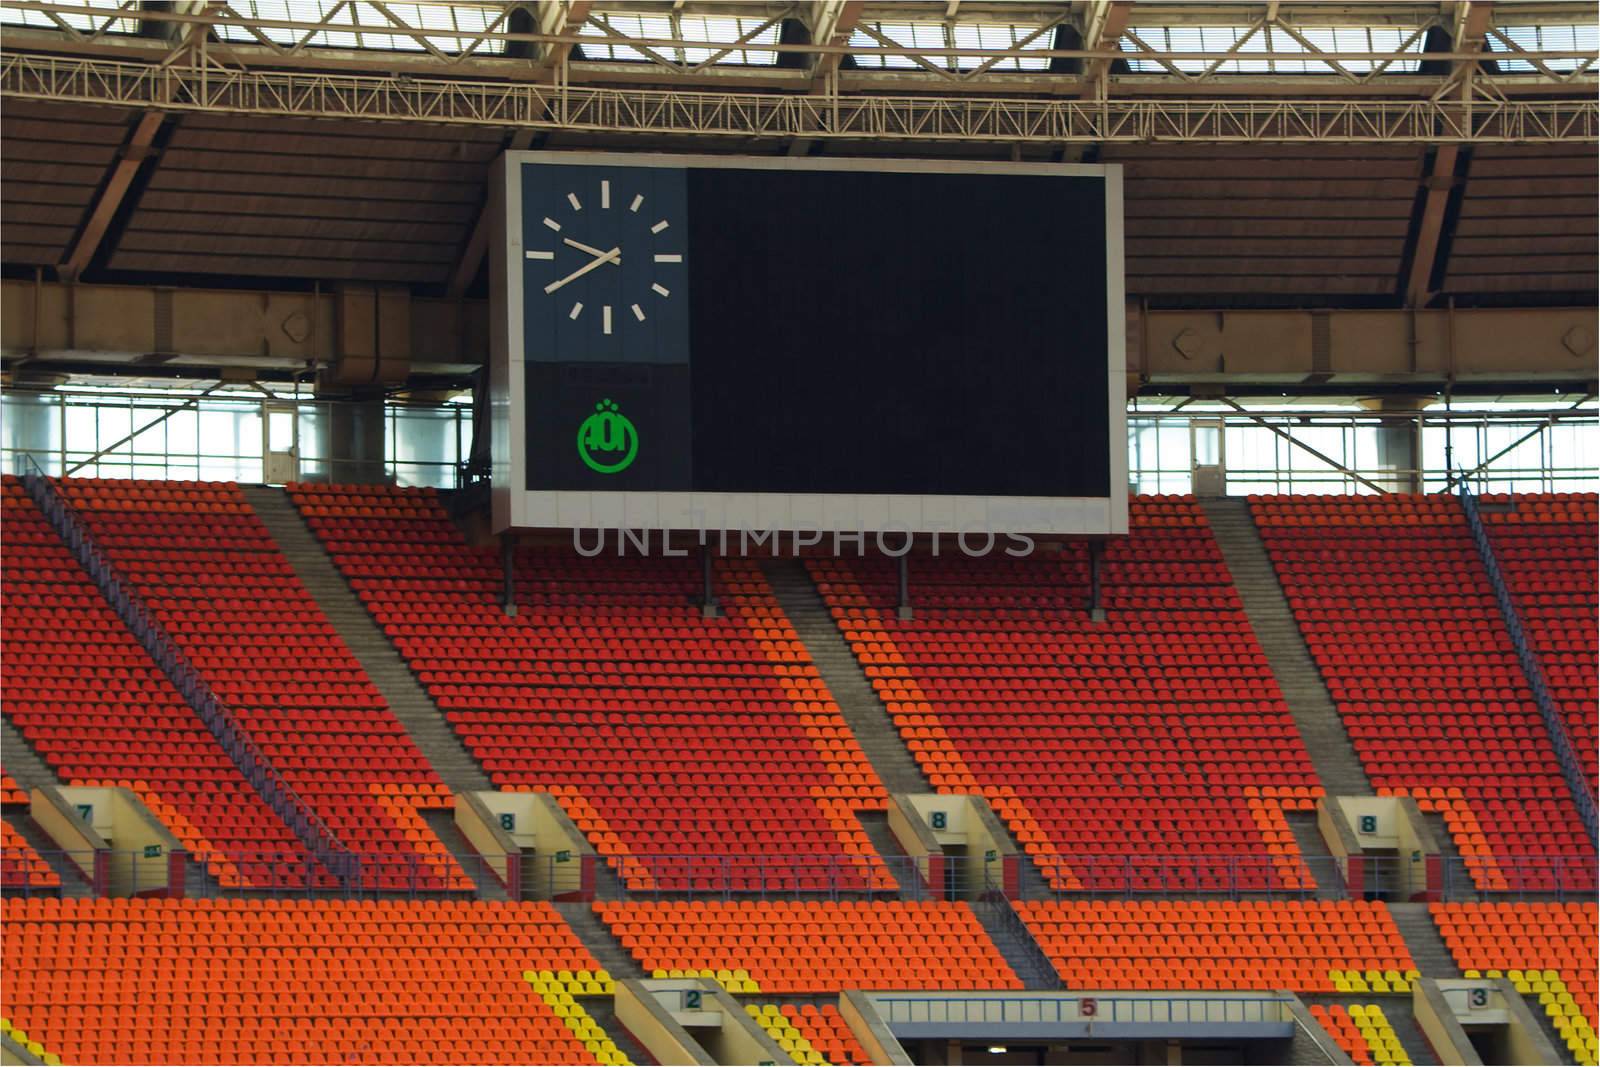 Rows of red and orange seats on the stadium with scoreboard displaying clock above them